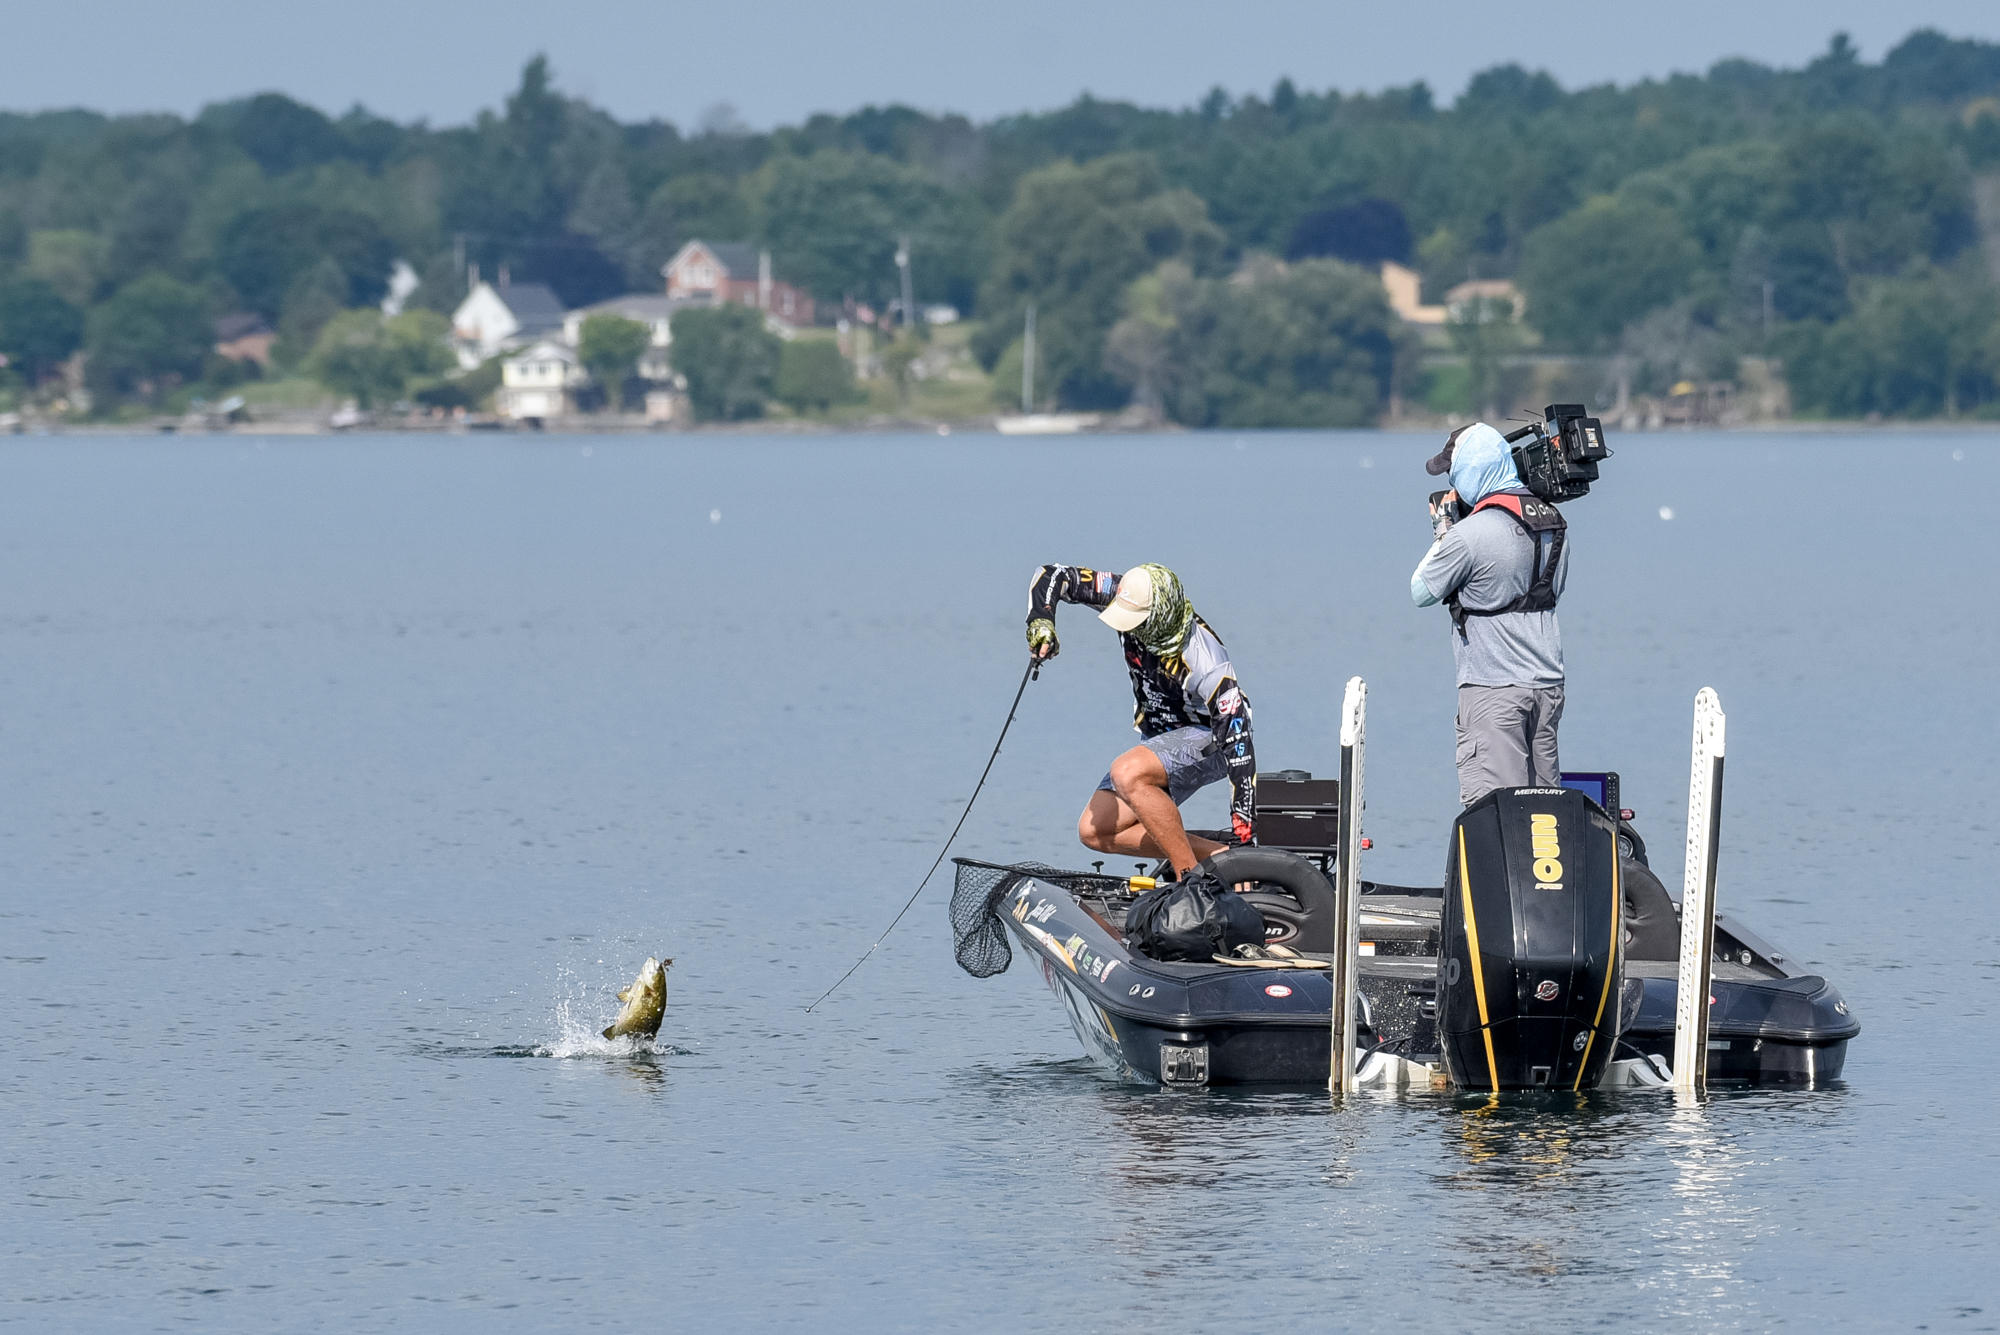 Top 10 Patterns from Smith Lake - Major League Fishing